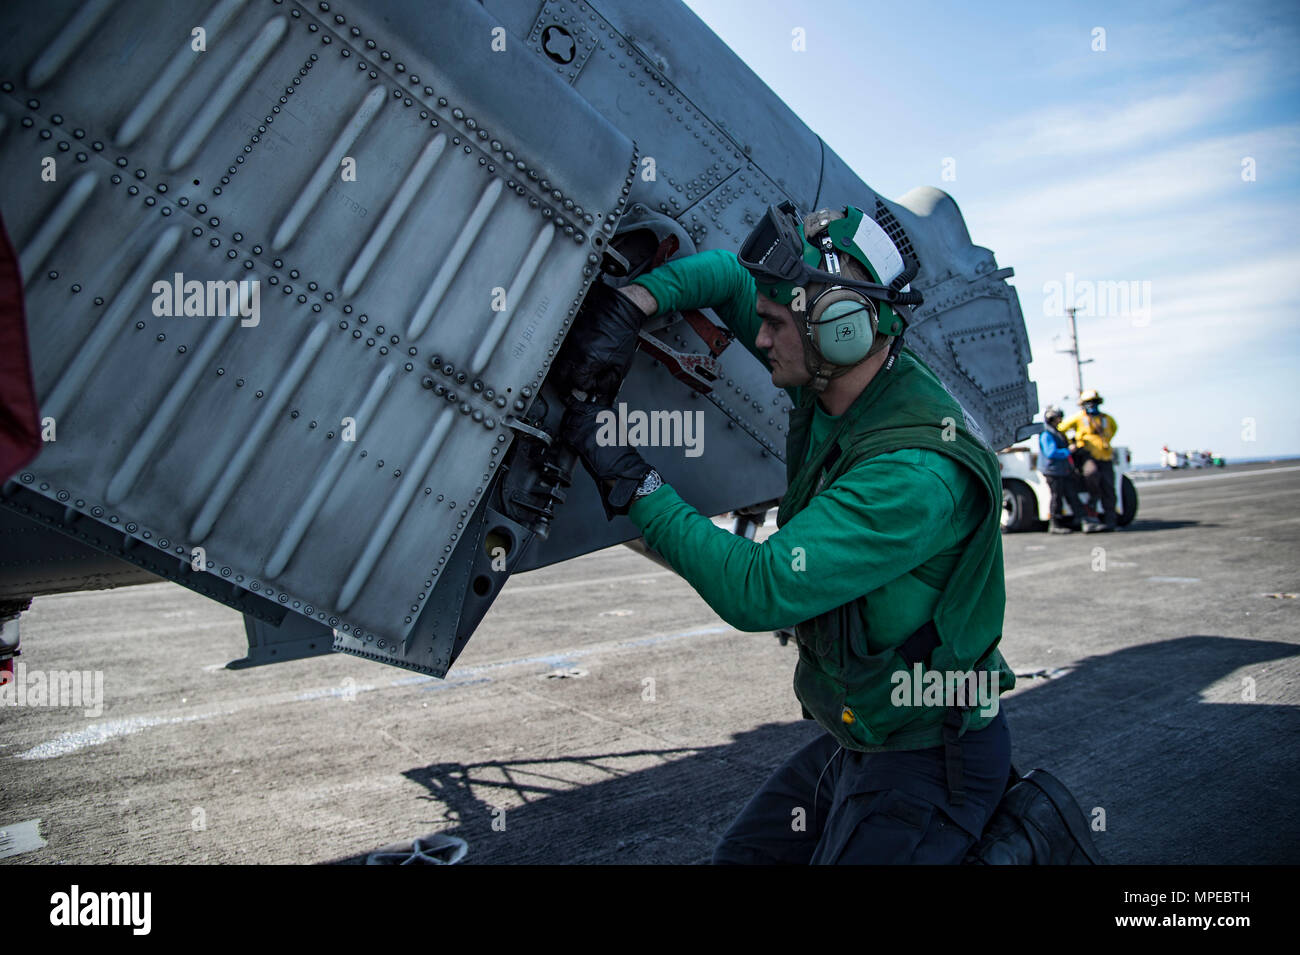 170209-N-OS569-050  ATLANTIC OCEAN (Feb. 9, 2017) Aviation Structural Mechanic 3rd Class Corbin Love conducts maintenance on an MH-60S Sea Hawk helicopter assigned to the Dragon Whales of Helicopter Sea Combat Squadron (HSC) 28 on the flight deck of the aircraft carrier USS Dwight D. Eisenhower (CVN 69) (Ike). Ike is currently conducting aircraft carrier qualifications during the sustainment phase of the Optimized Fleet Response Plan (OFRP). (U.S. Navy photo by Mass Communication Specialist Seaman Zach Sleeper) Stock Photo